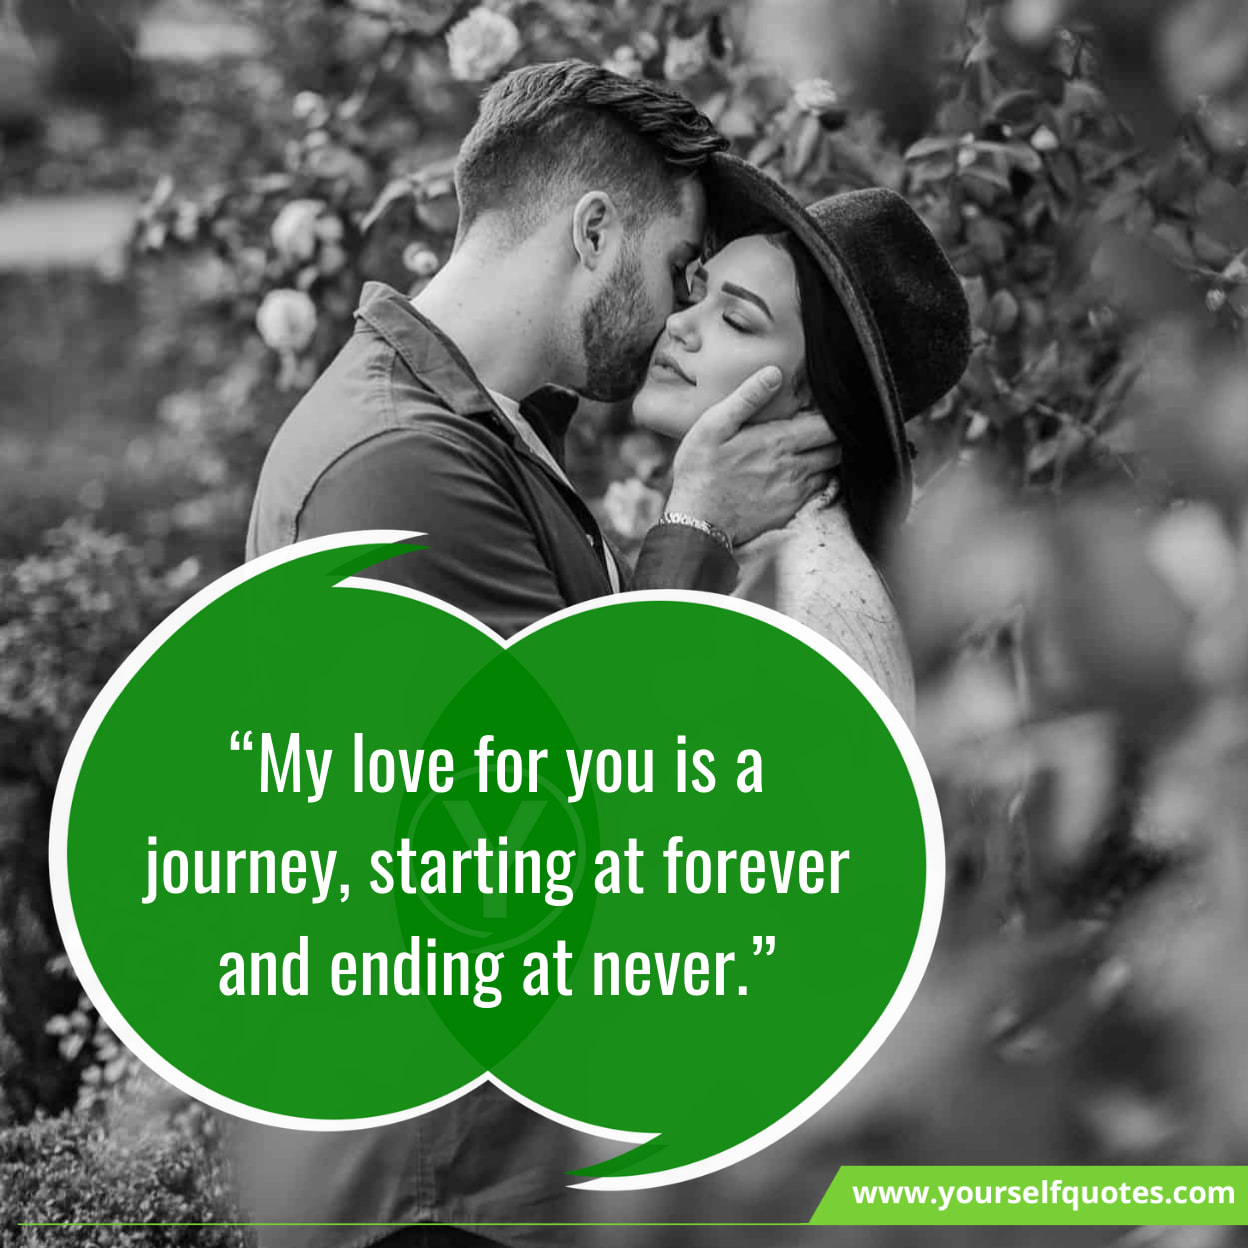 Best Quotes For Girlfriend